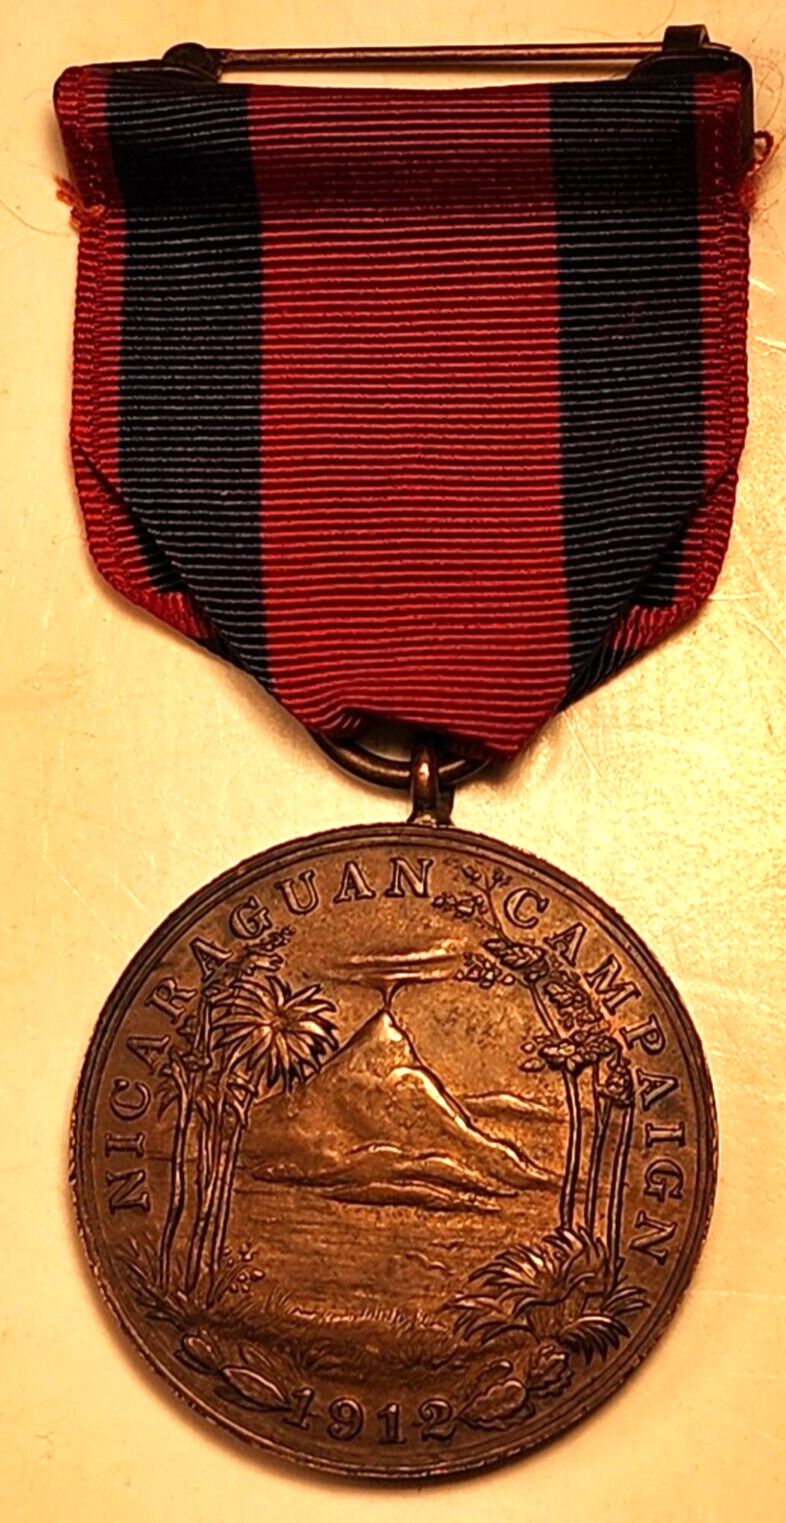 1912 U.S. NAVY NICARAGUAN CAMPAIGN FOR SERVICE MEDAL WRAP AROUND BROOCH